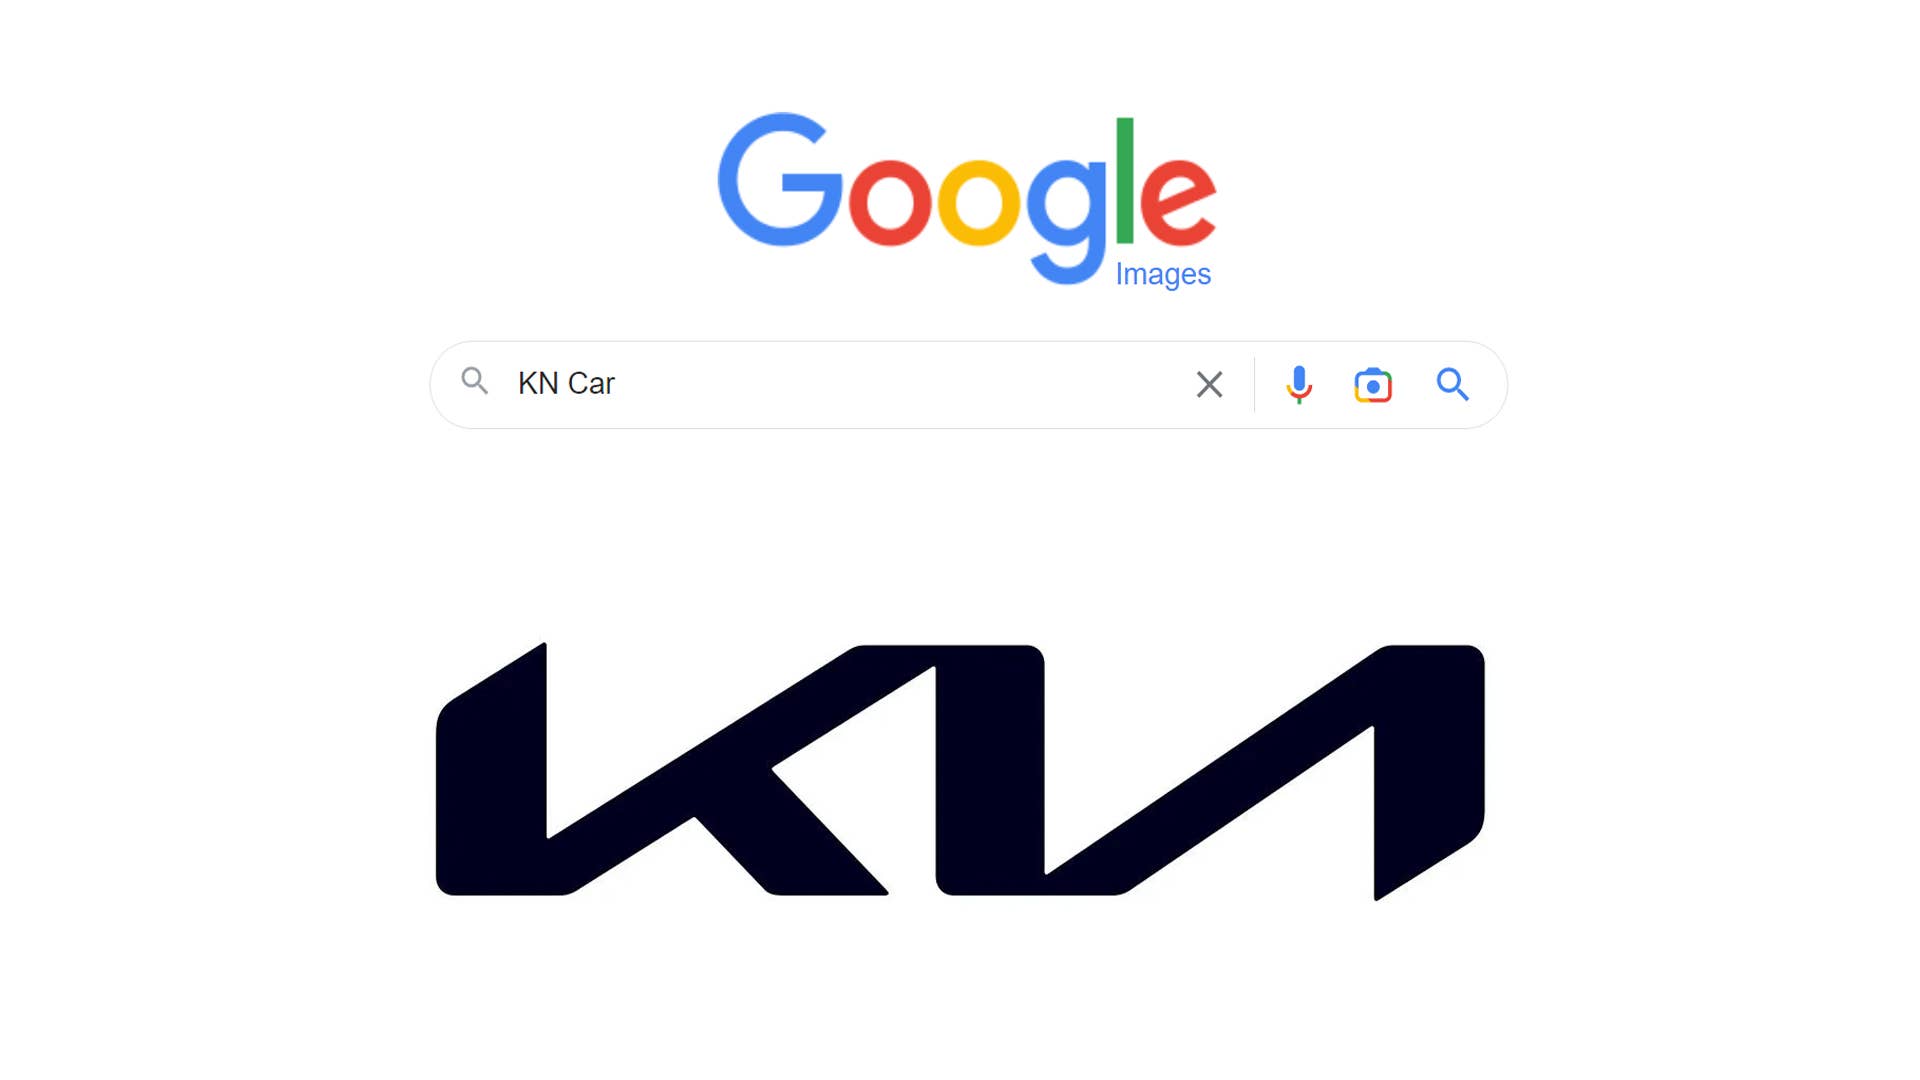 Kia’s Logo Is So Confusing That 30K People Google ‘KN Car’ Every Month | The Drive